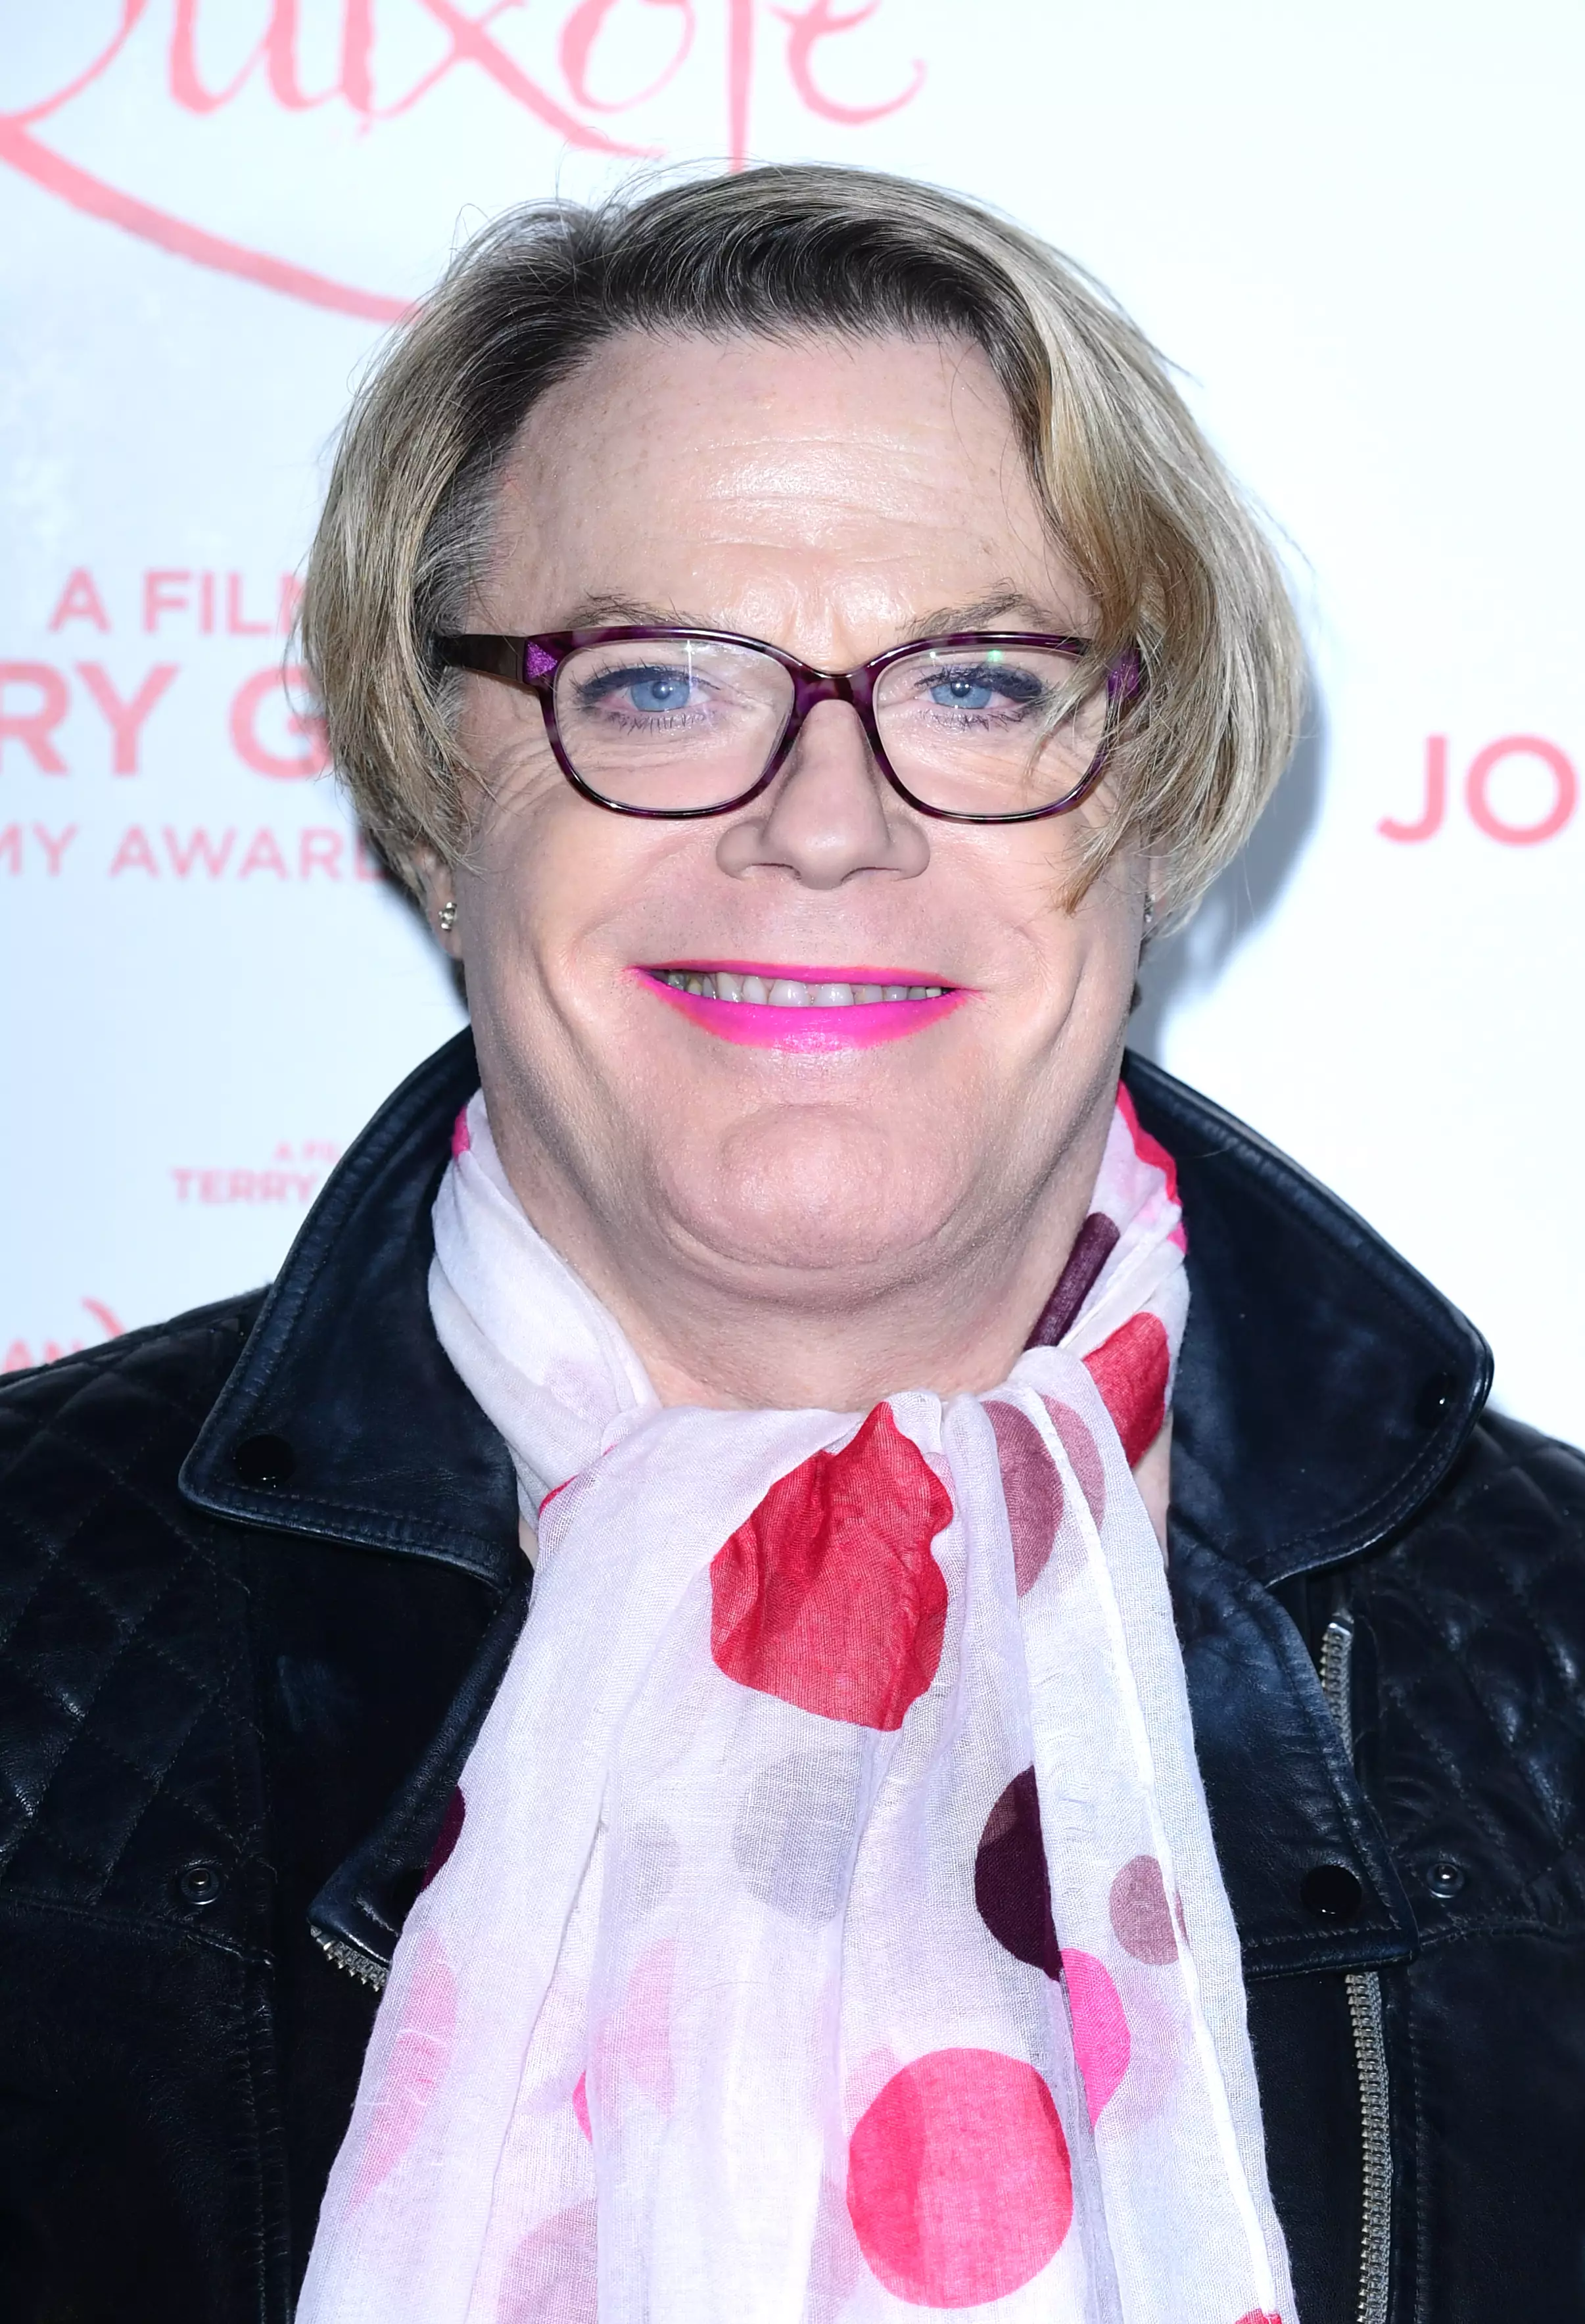 Eddie Izzard recently revealed that she was gender fluid and preferred to be addressed as 'she/her'.